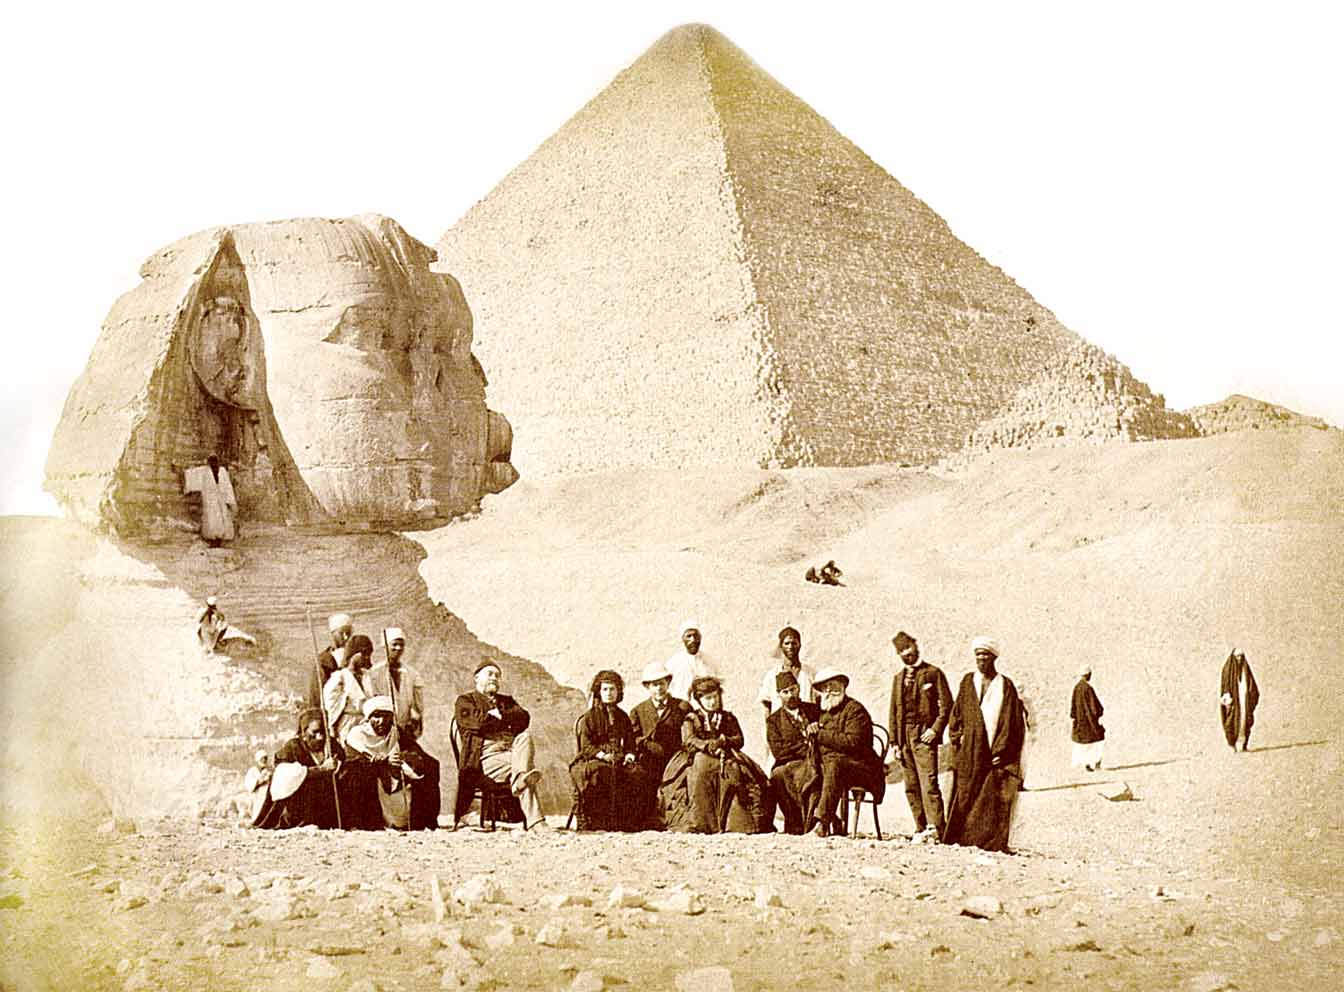 French archaeologist Auguste Mariette (seated, far left) and Emperor Pedro II of Brazil (seated, far right) with others surrounded by local Egyptians during the Emperor's trip to Egypt in the end of 1871. Behind them can be seem the Great Sphinx of Giza and the Giza Necropolis.